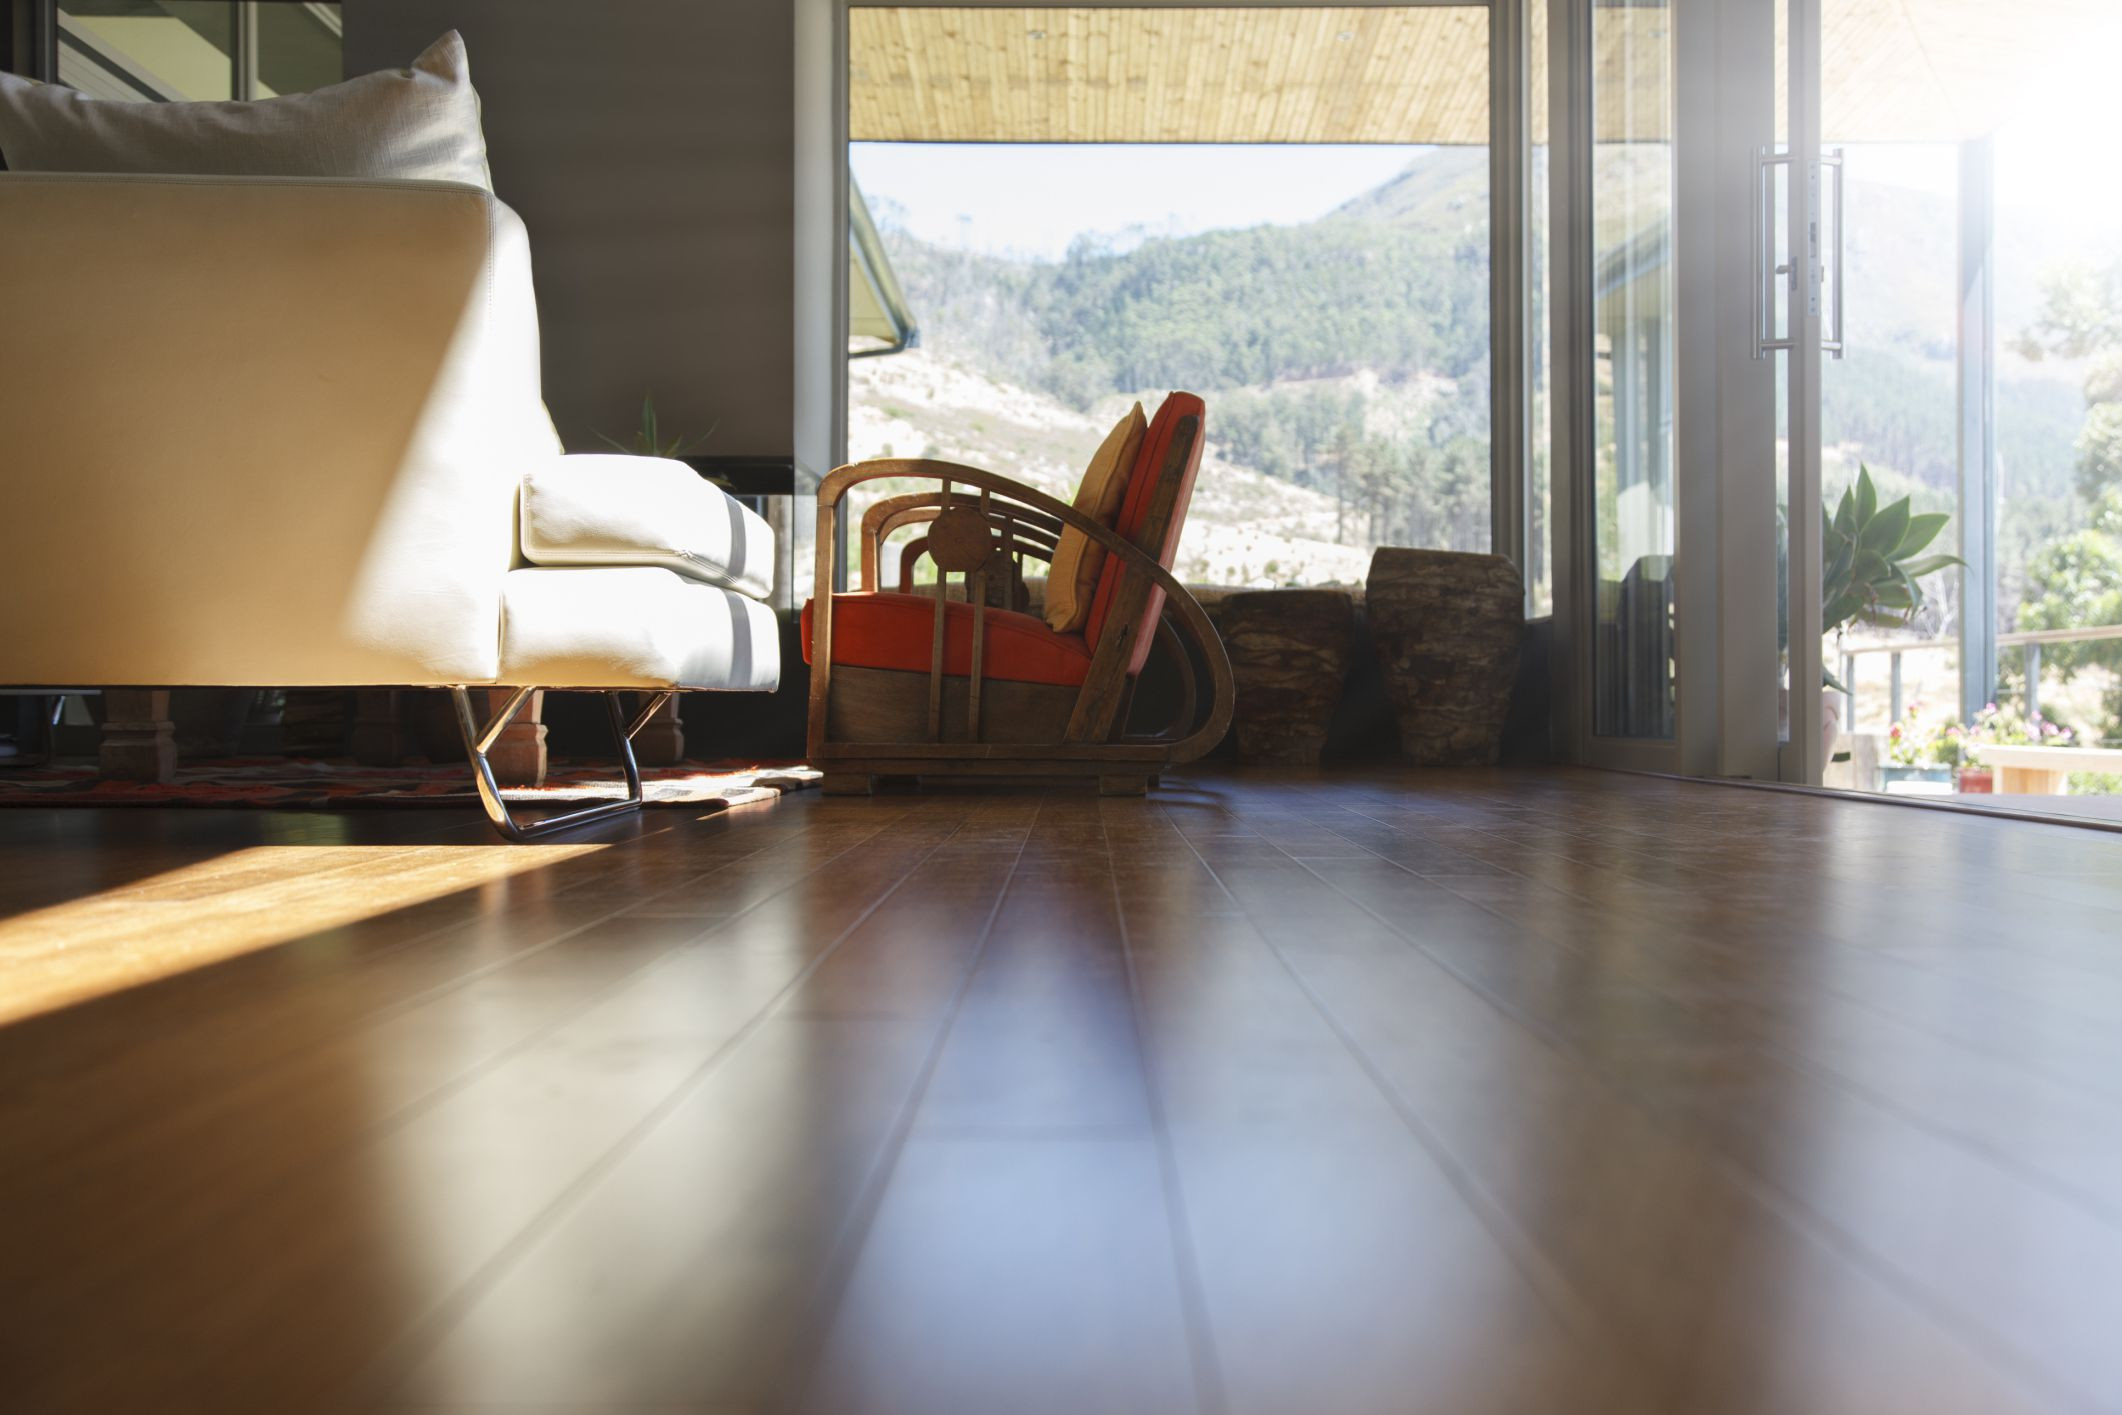 how to install floating hardwood floors on concrete of floating floors basics types and pros and cons regarding exotic hardwood flooring 525439899 56a49d3a3df78cf77283453d